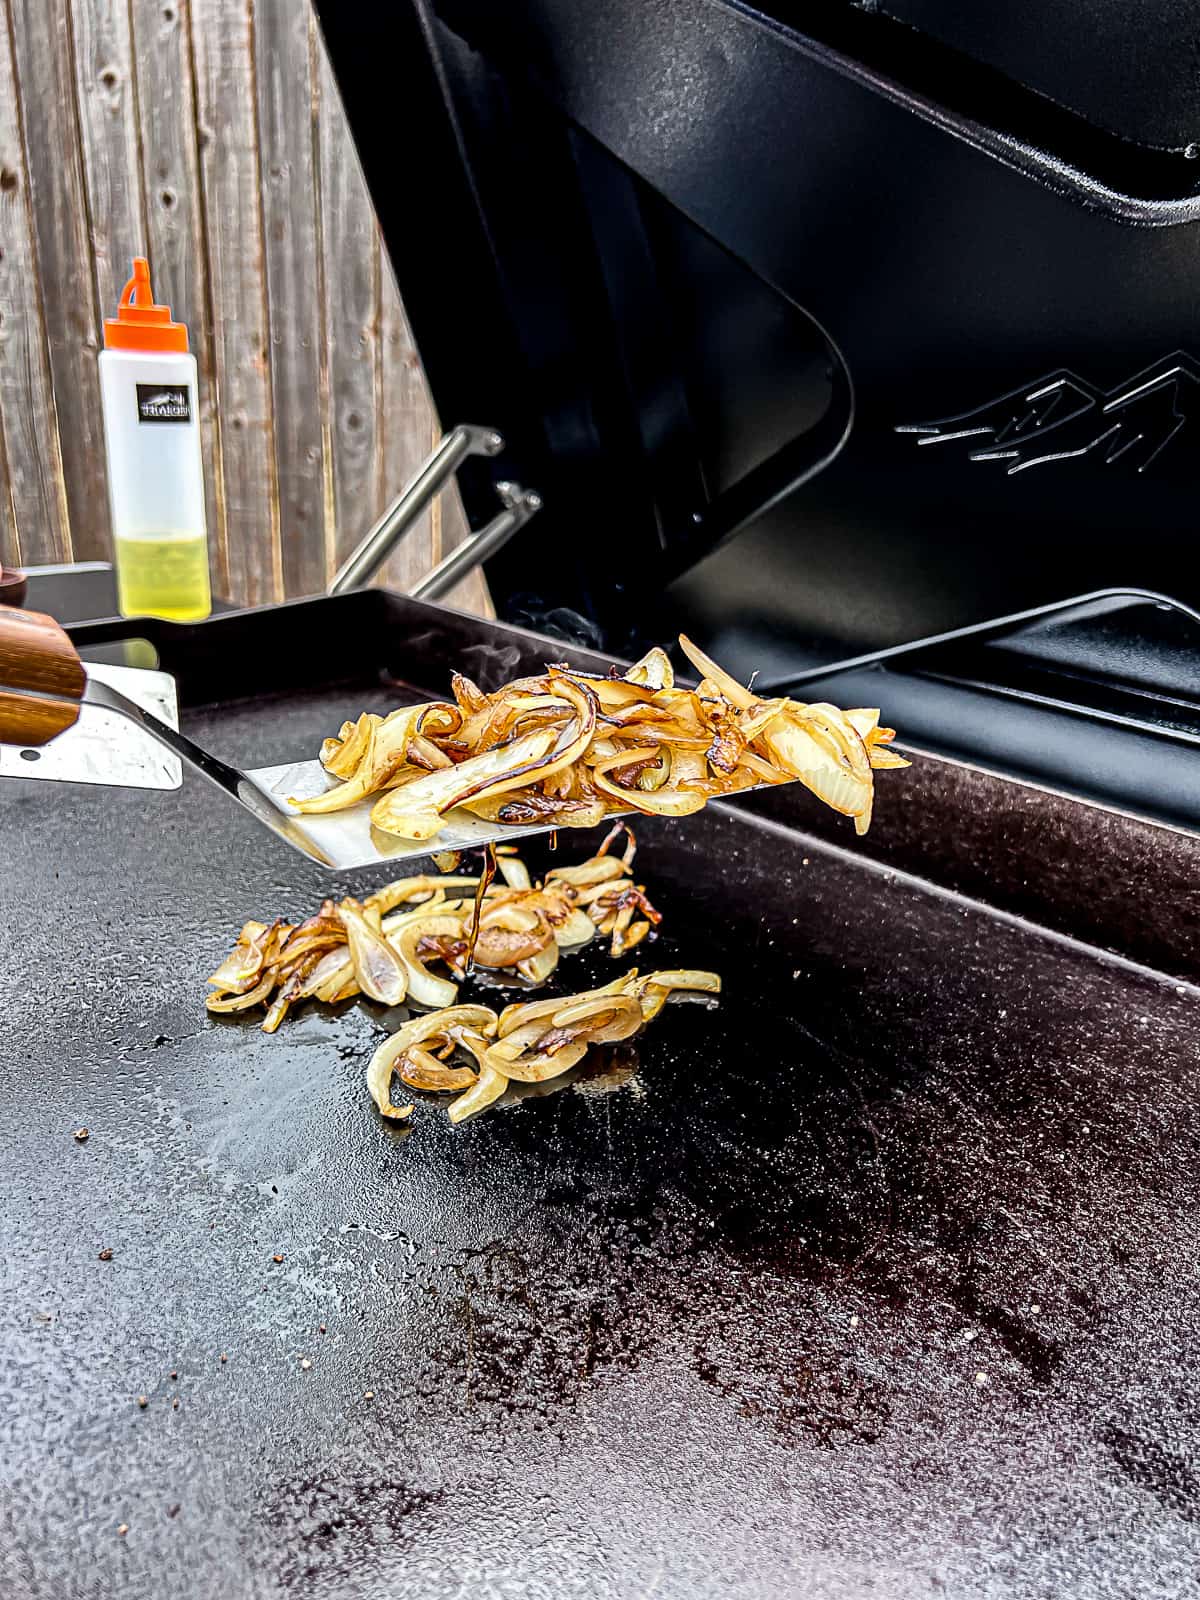 Cooking Griddle Onions with Traeger Grills Flatrock Griddle